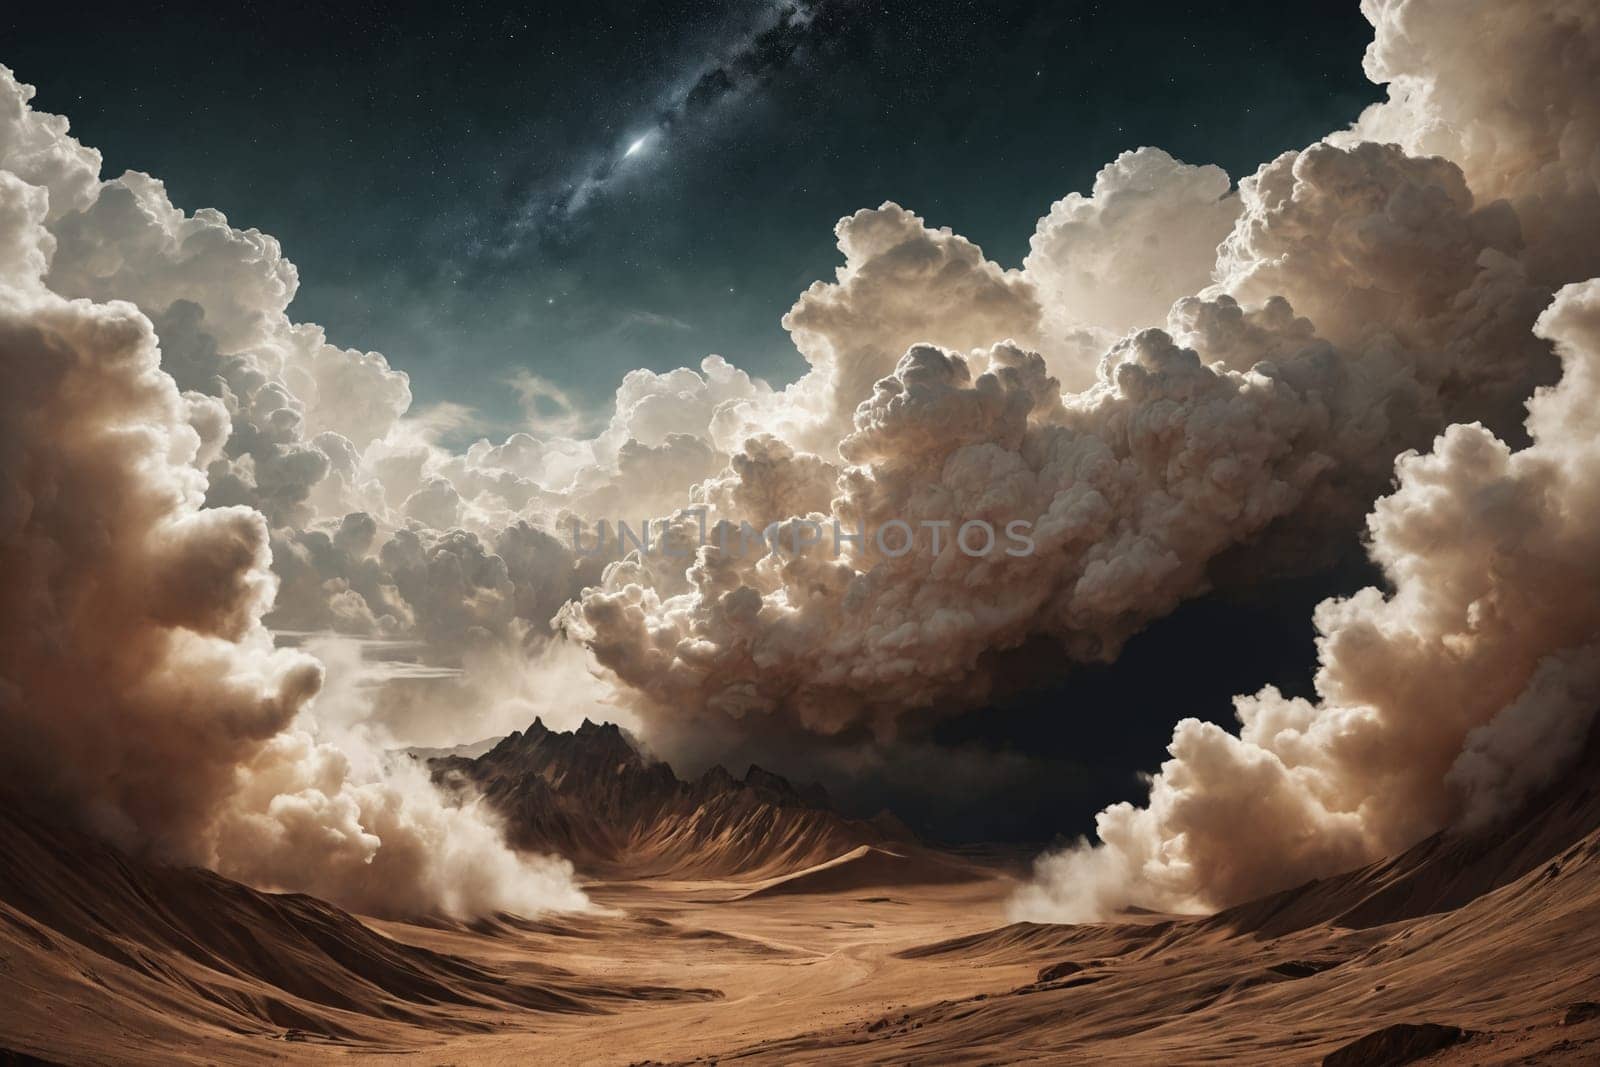 Surreal collision of celestial skies and volcanic ferocity in a barren landscape.